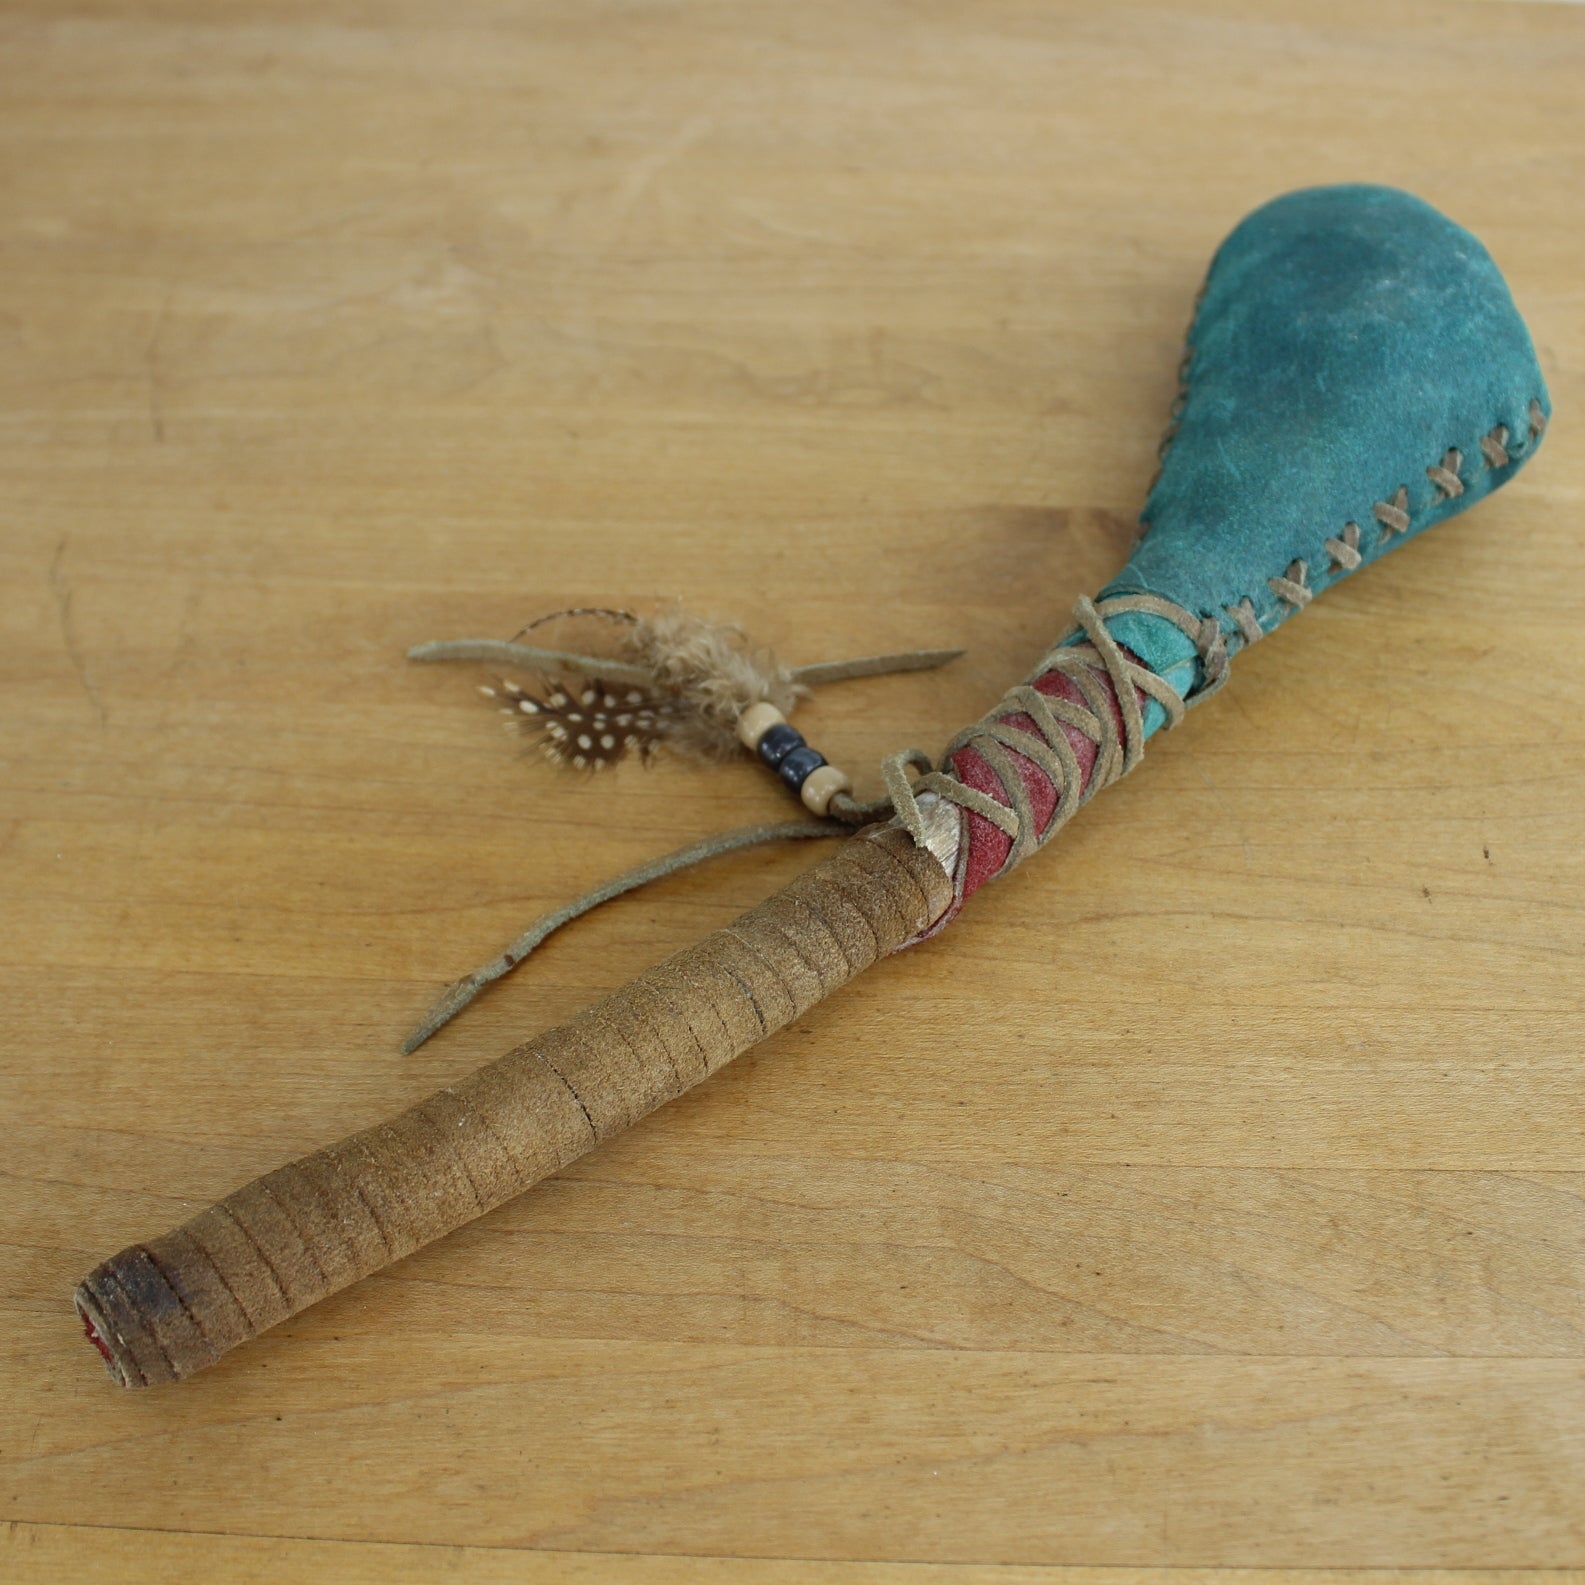 Native American Style Dance Rattler Shaker Turquoise Suede Feather Beads intact well made